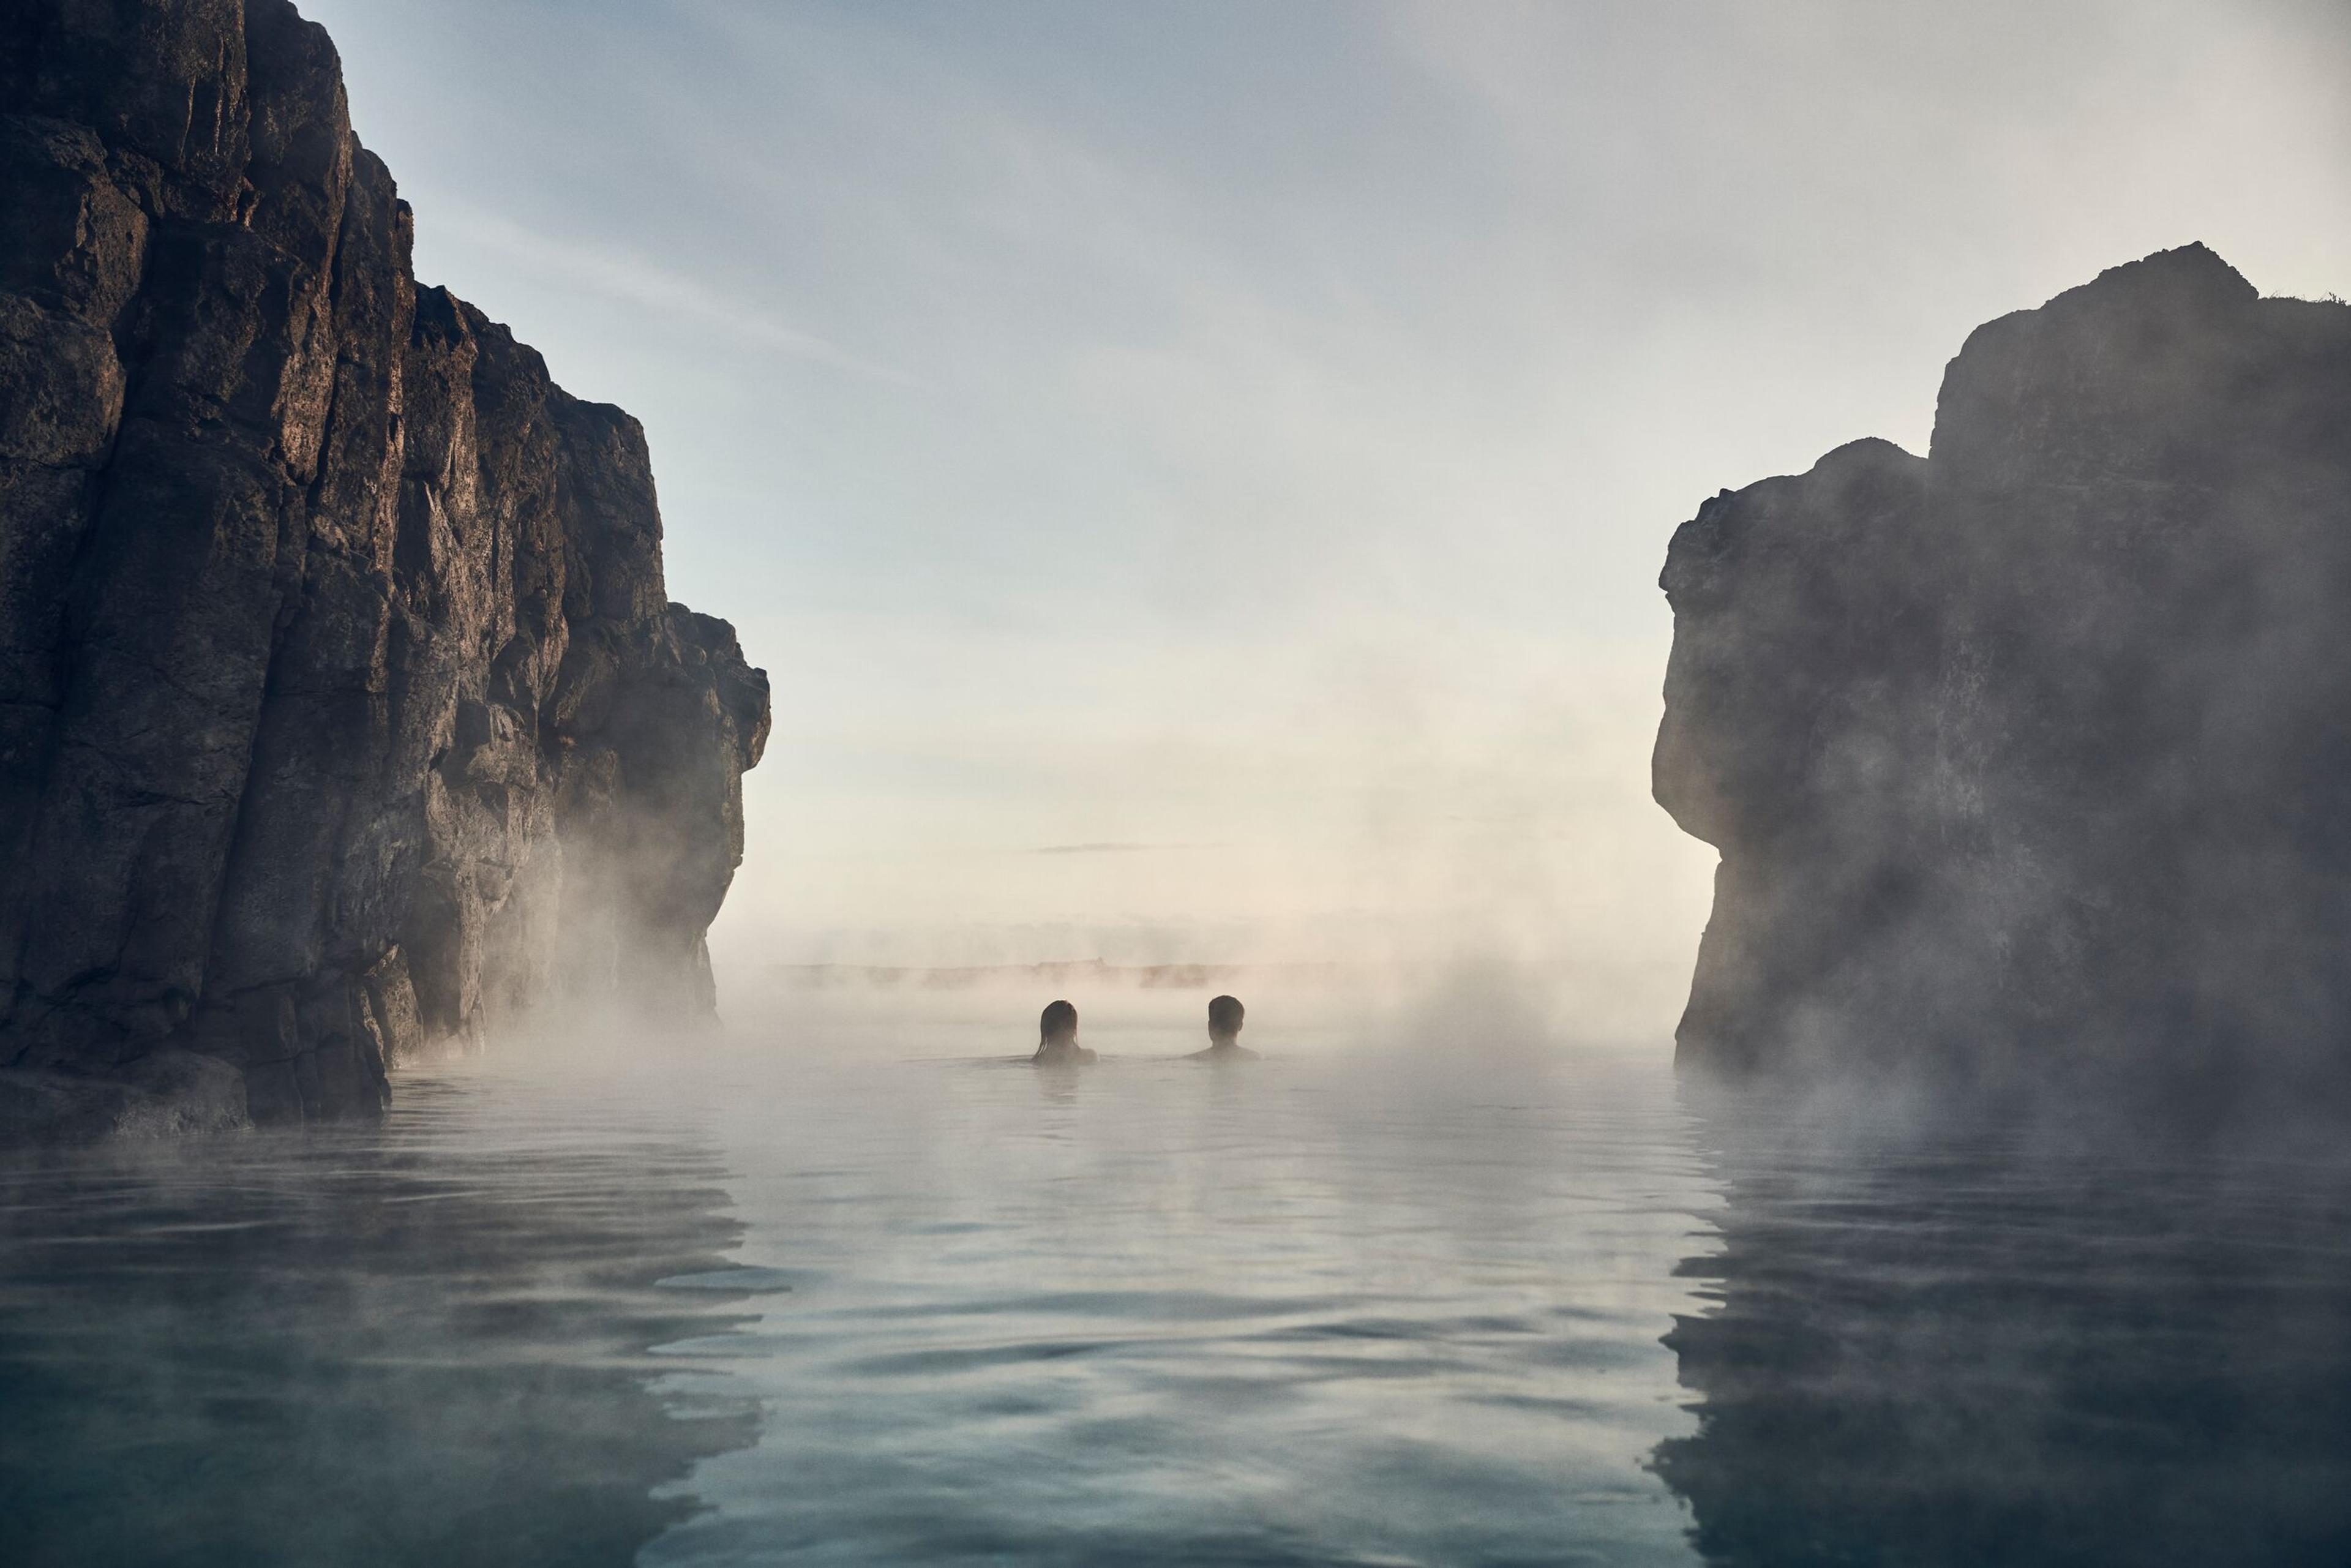 View over the infinity pool at the Sky Lagoon , Iceland.